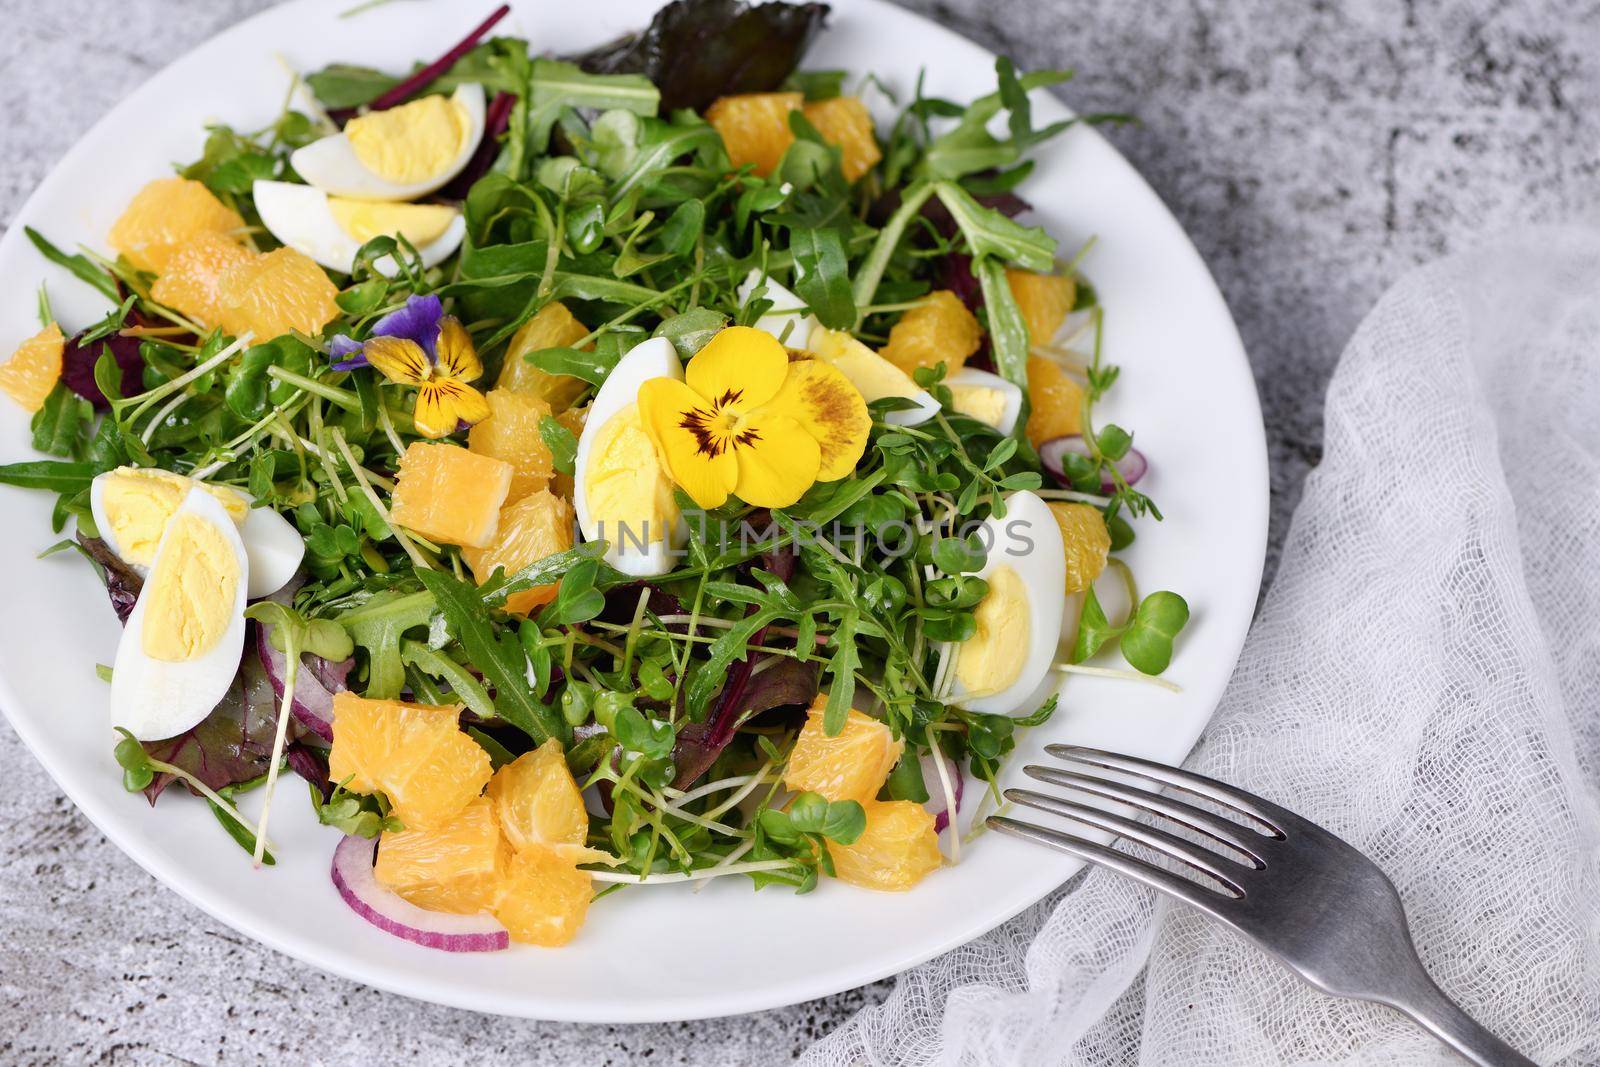 Spring fruit, citrus and vegetable salad from a mix of lettuce leaves and sprouts of radish and lentils, arugula, microgreens, quail egg wedges, with edible flowers - pansies